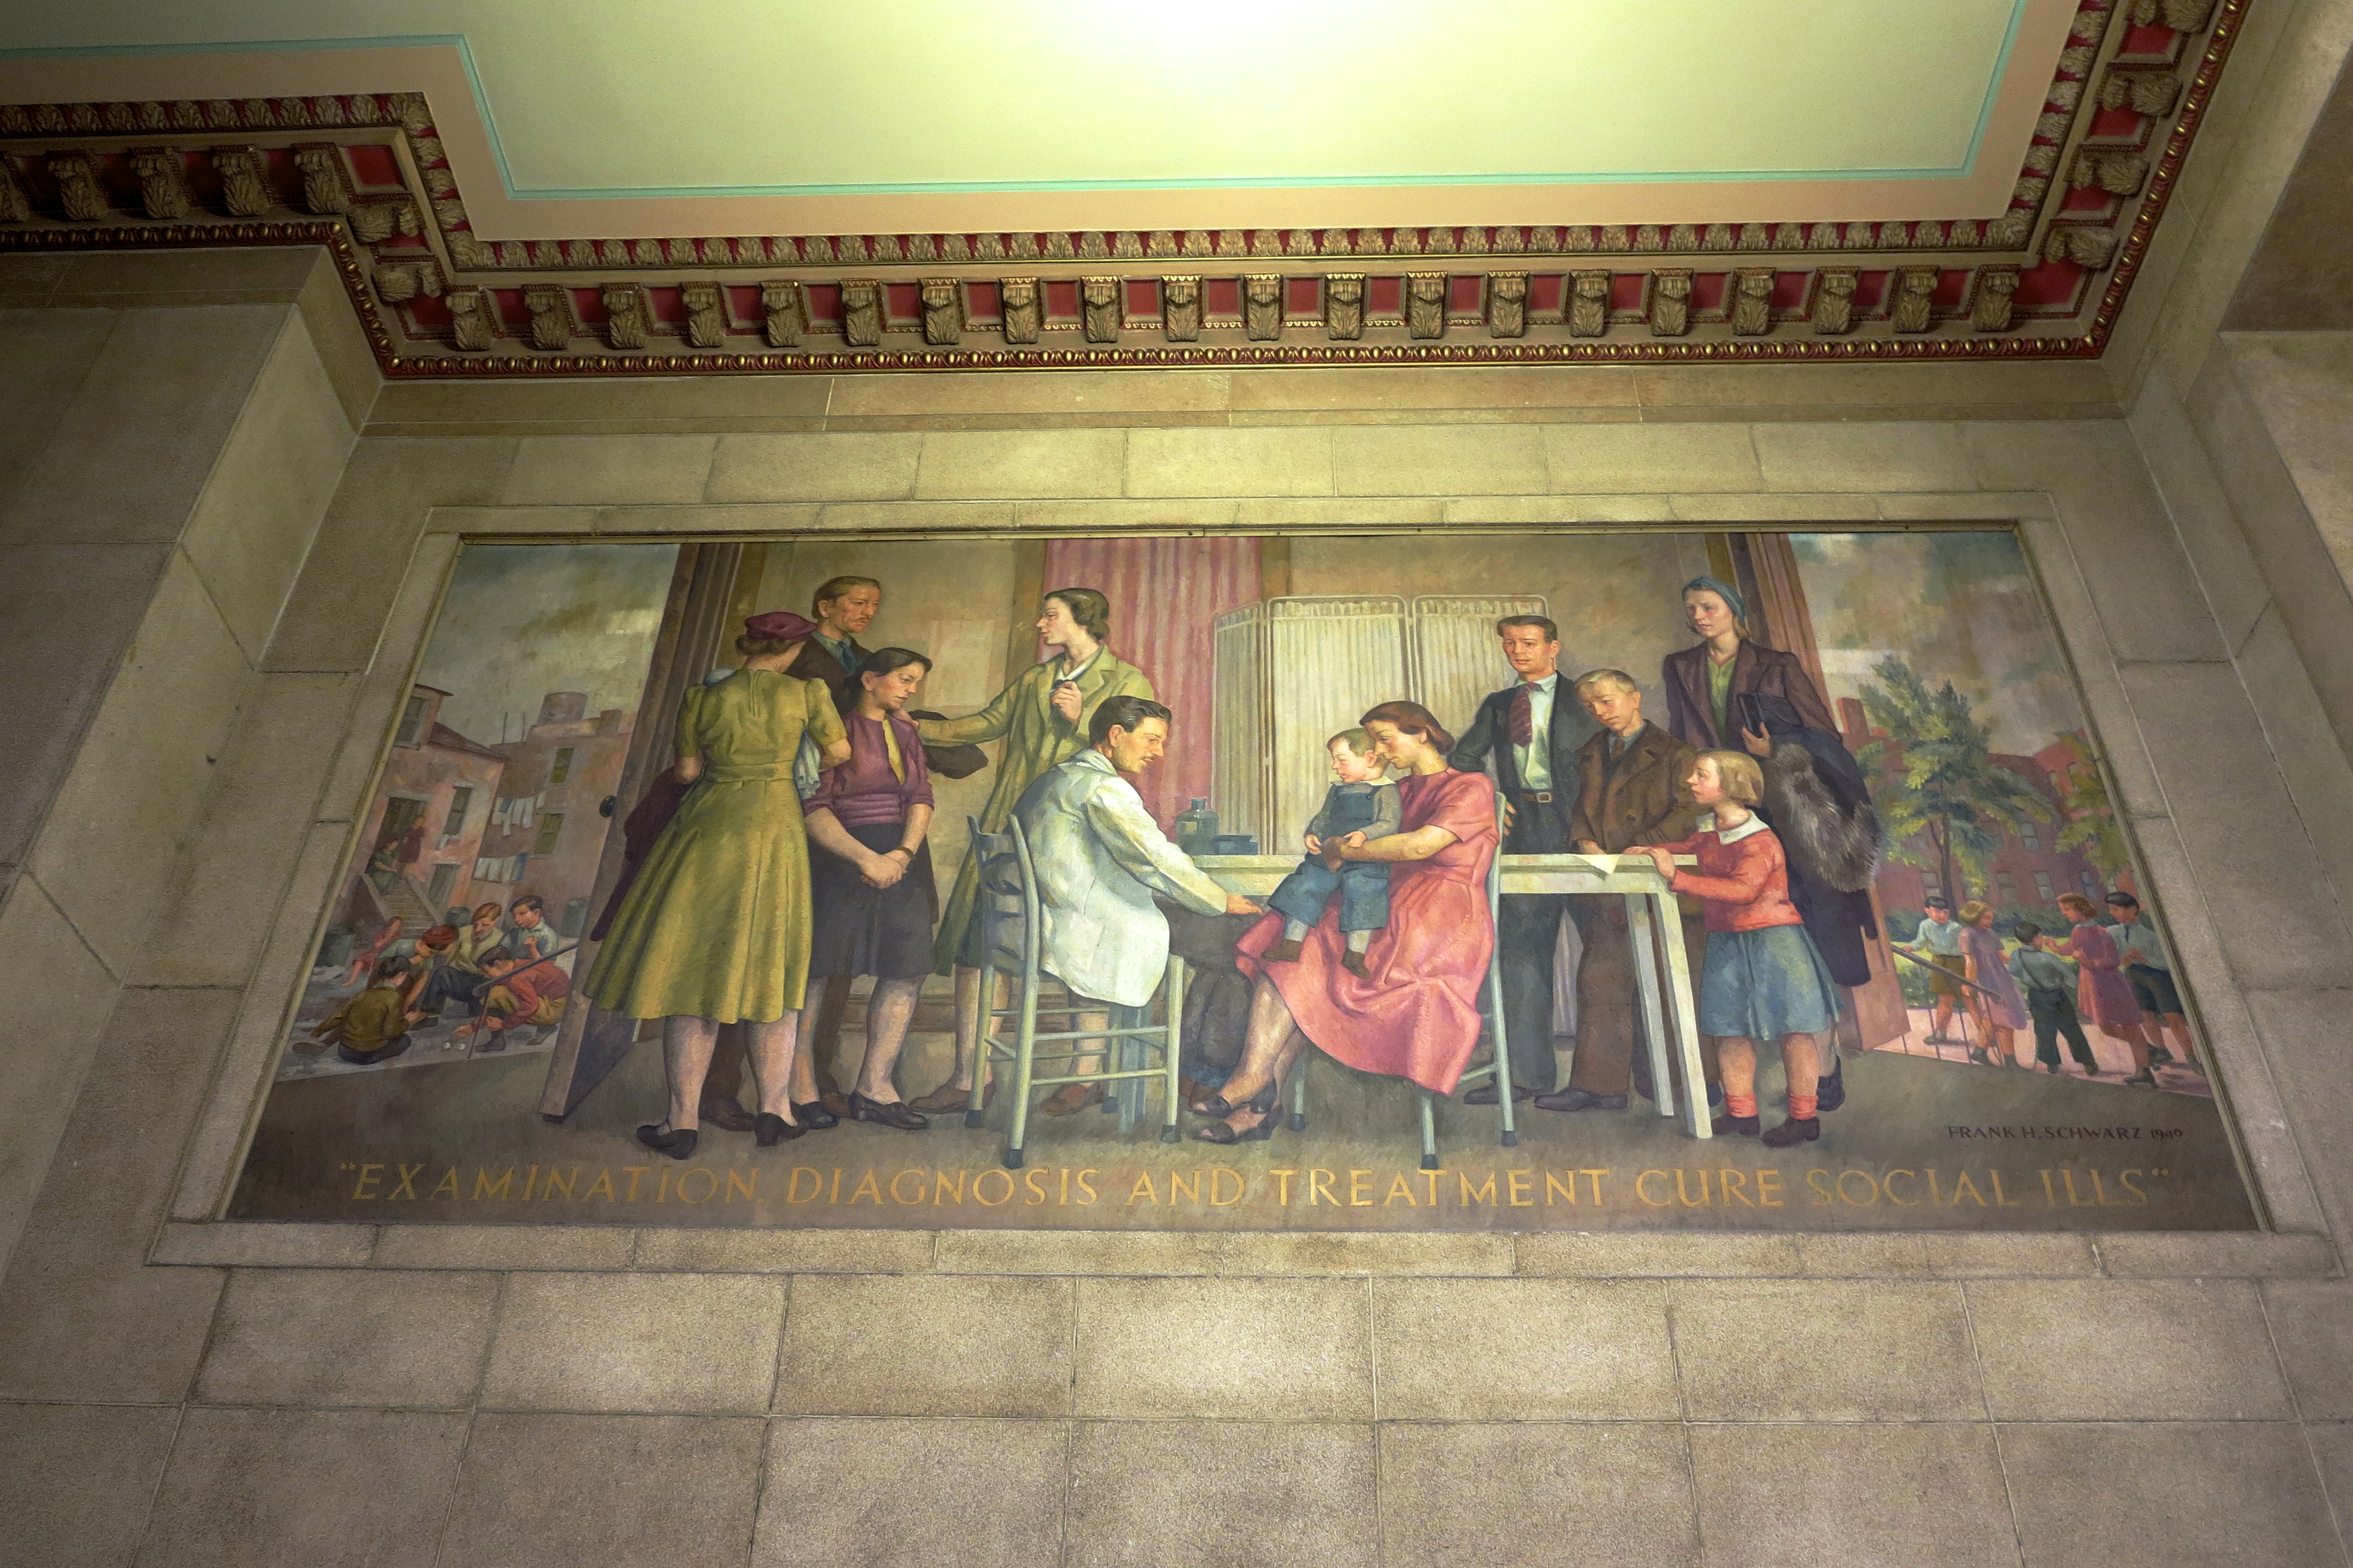 Examination diagnosis and treatment cure social ills - Elevator bank mural by Frank H Schwartz